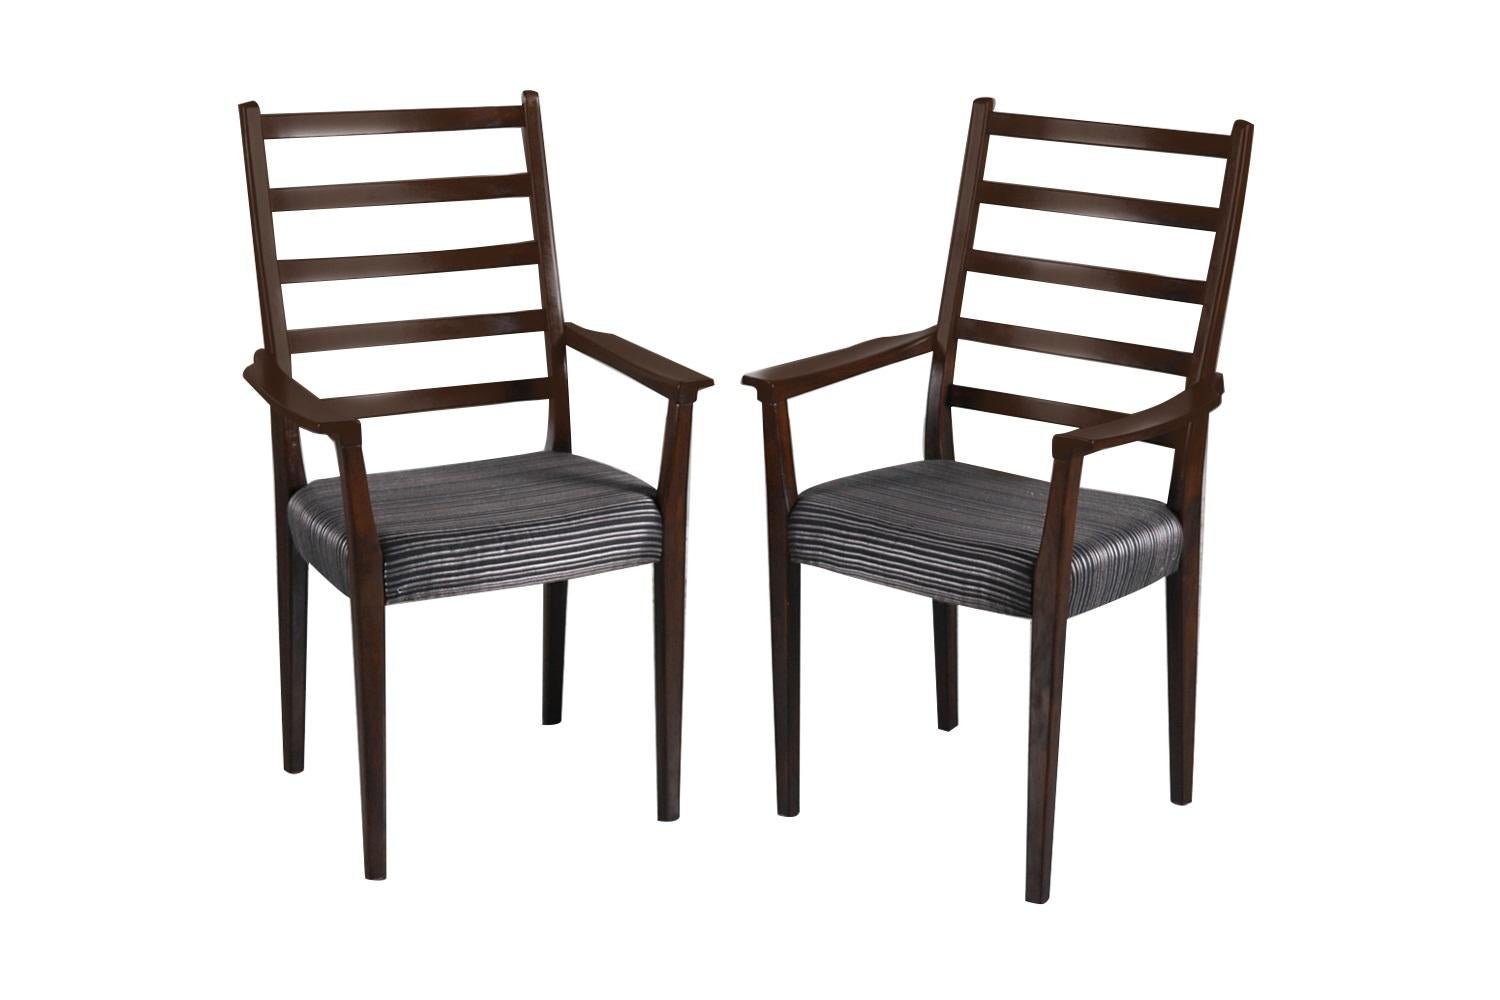 An outstanding set of six Rosewood dining chairs circa 1970's. This stunning set of six ladder back rosewood chairs features two arm chairs and four side chairs in original beautiful black and gray striped upholstered seats. The arm chairs are